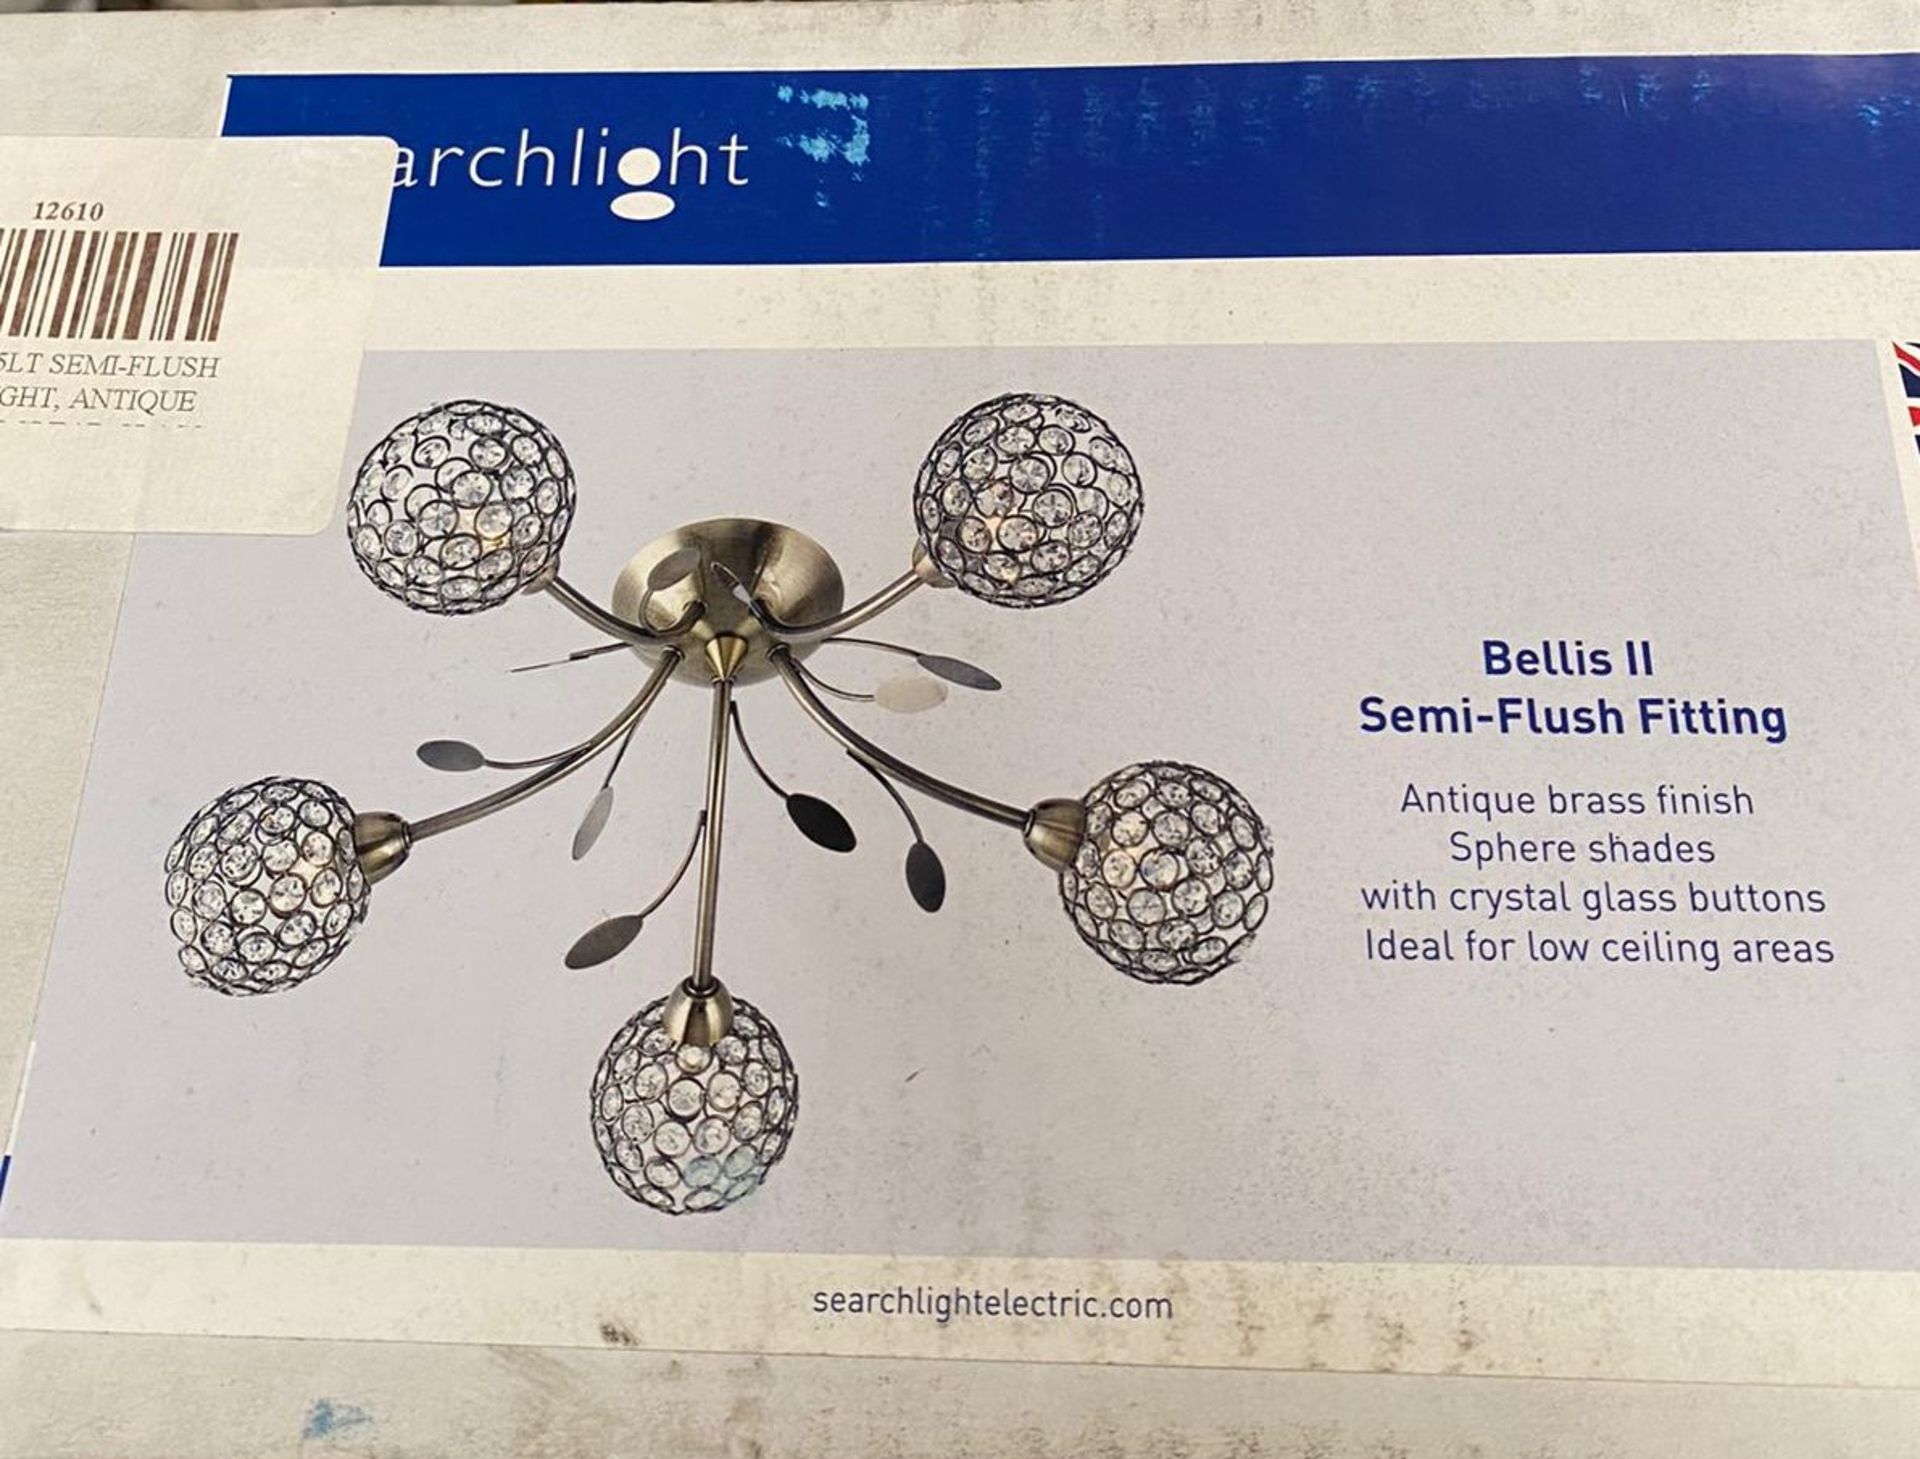 1 x Searchlight Bellis II Semi-Flush Fitting in Antique Brass - Ref: 6575-5AB- New Boxed - RRP: £190 - Image 2 of 4